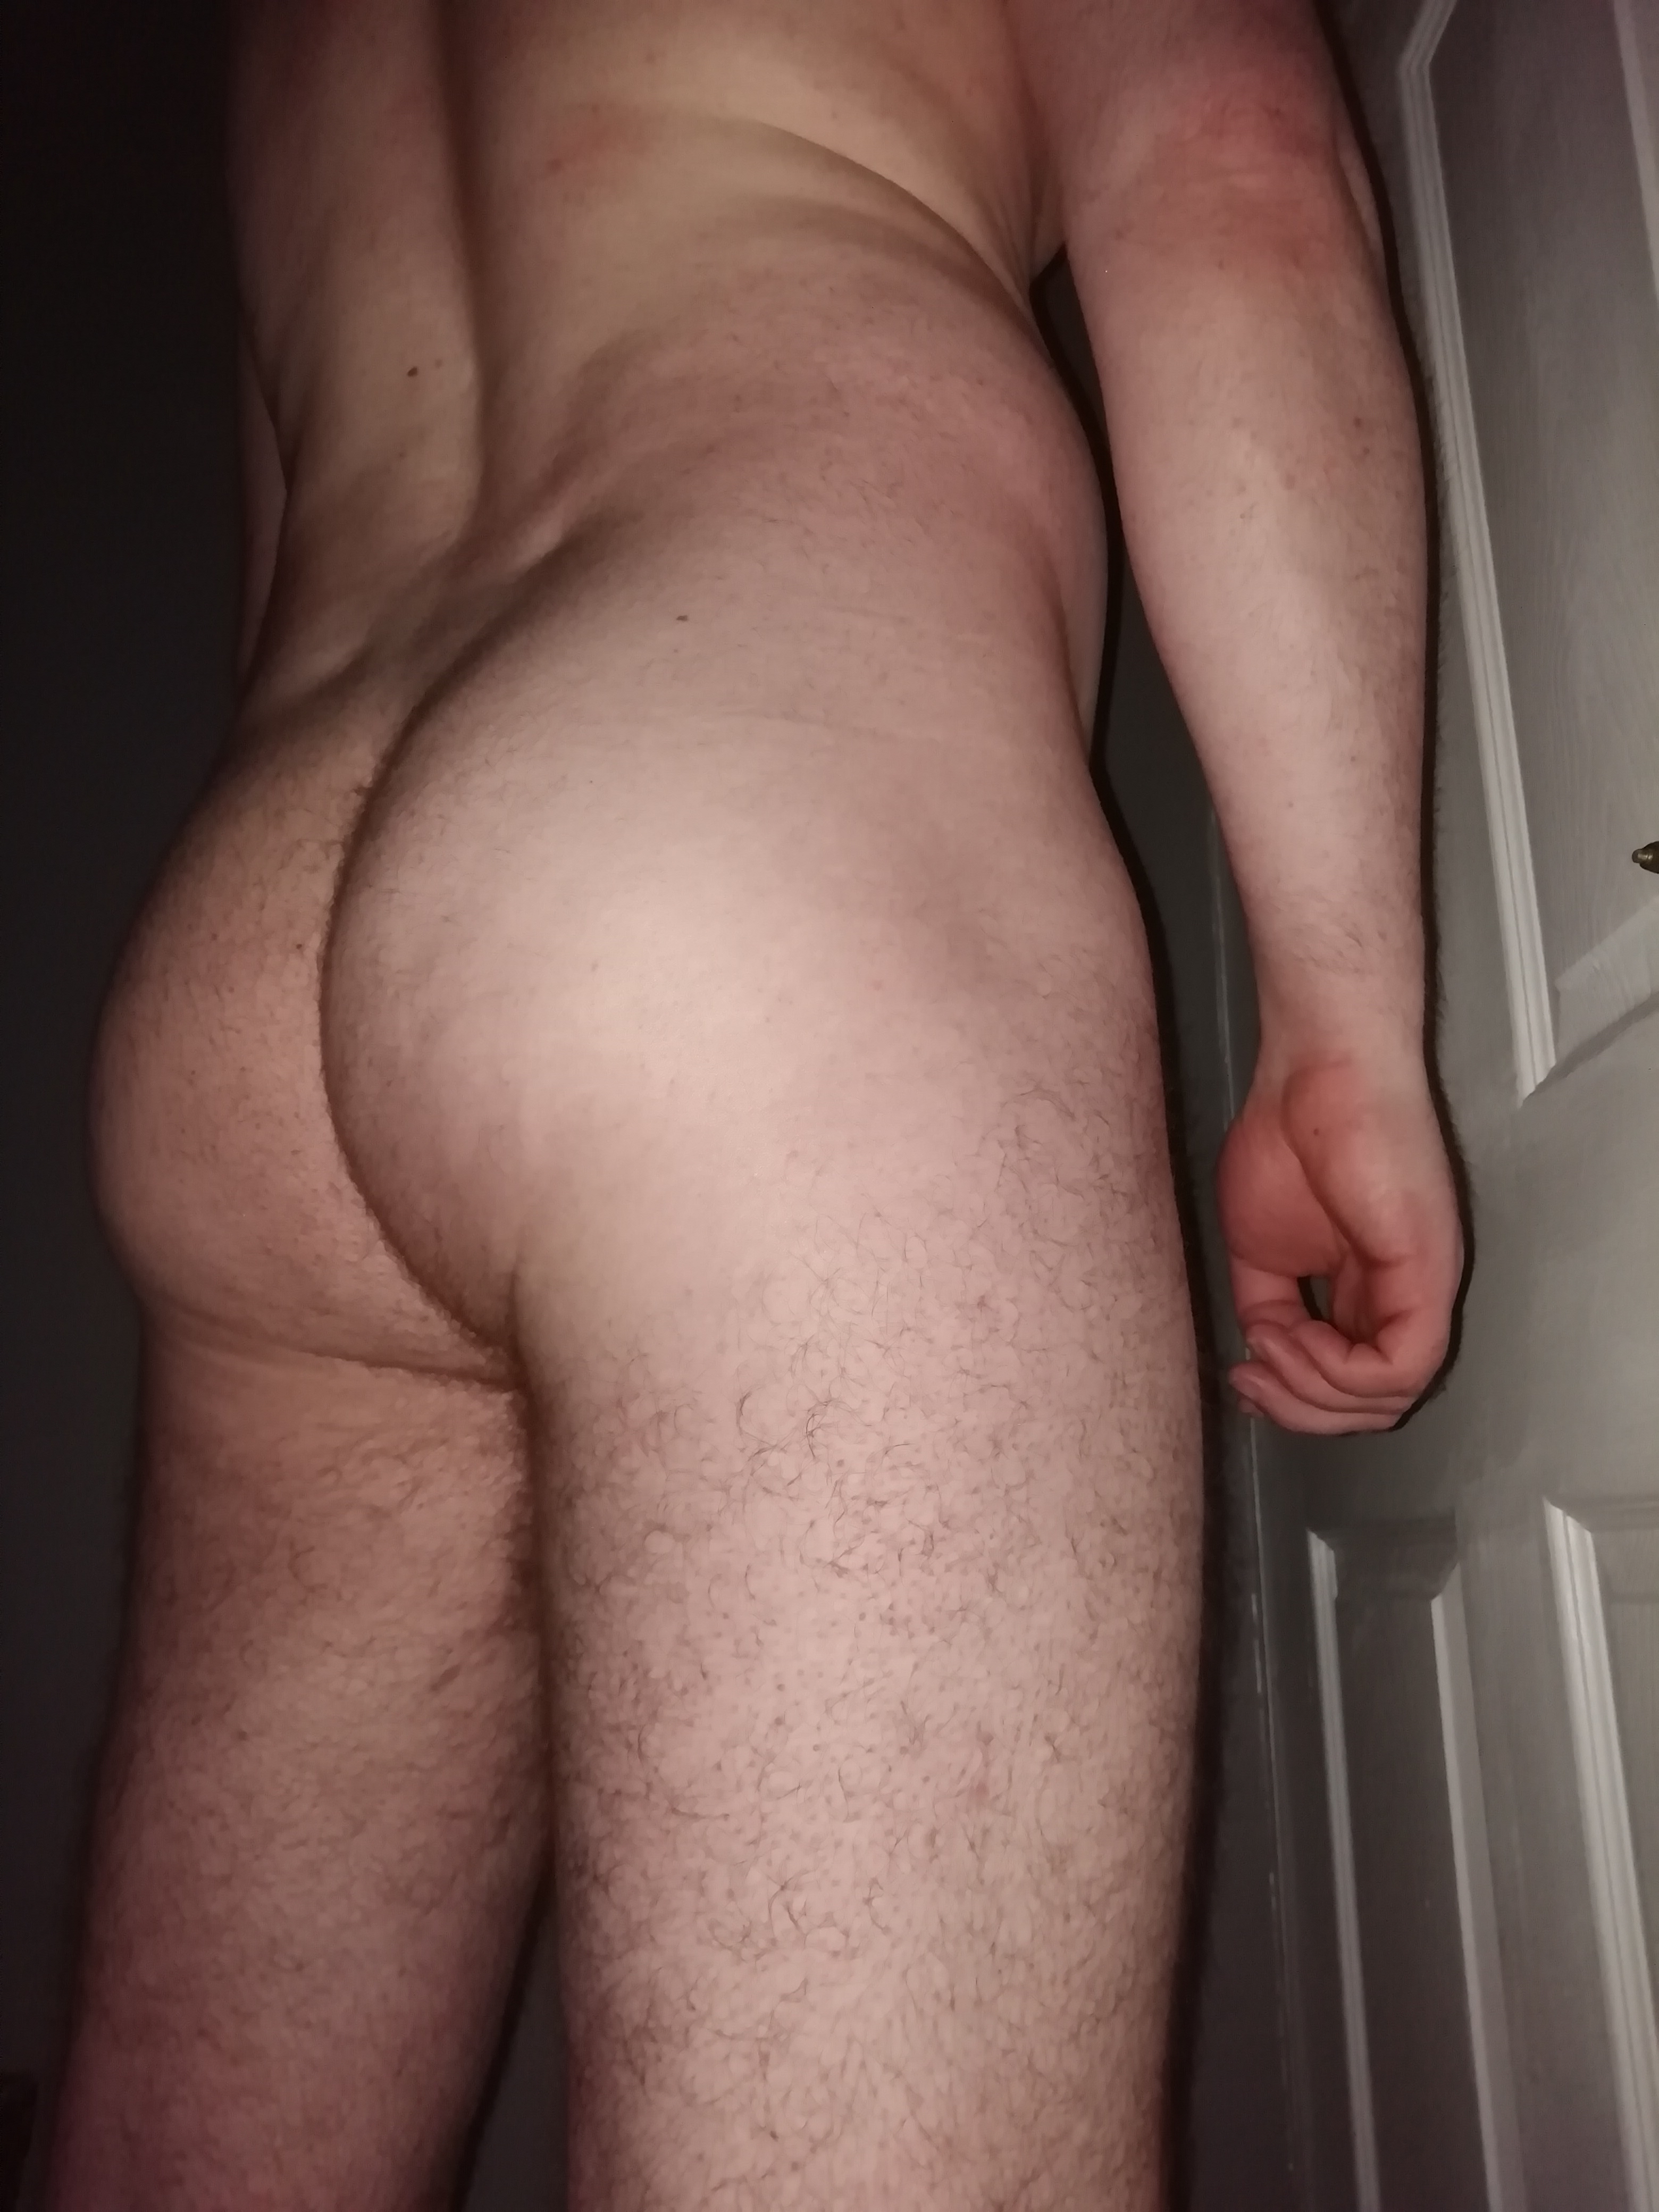 Gay Ass - Photo of my ass - Amateur Gay Porn Pictures And Stories